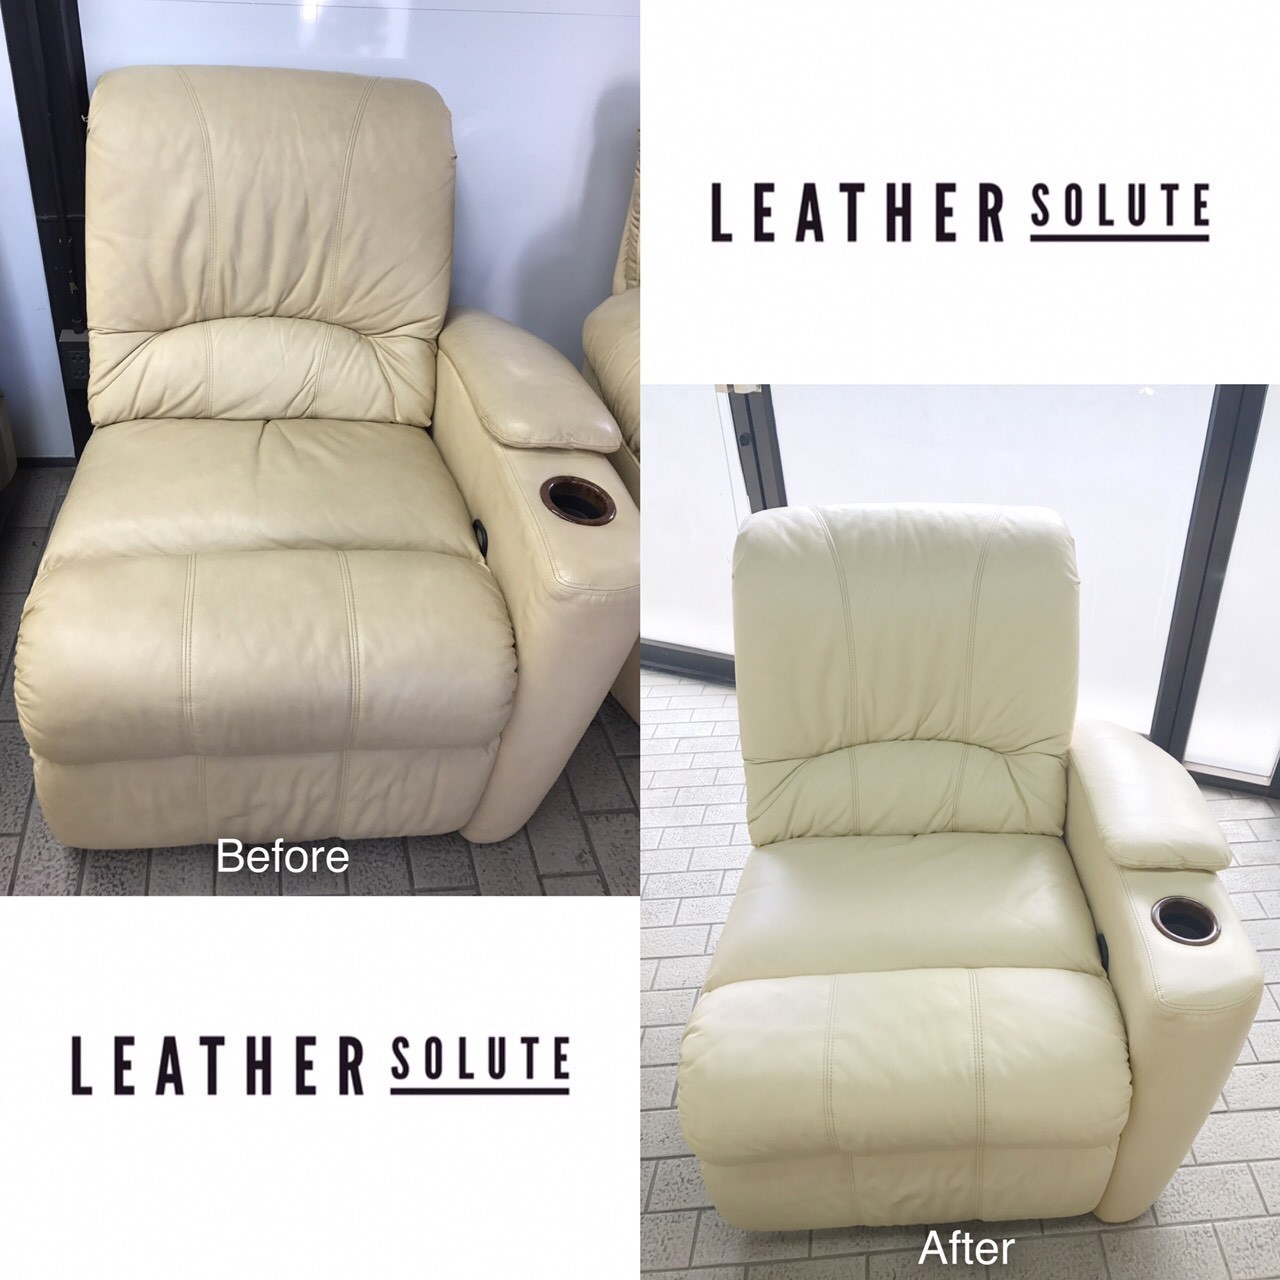 //www.leathersolute.co.th/wp-content/uploads/2018/12/Cleaning-furniture_๑๘๑๒๓๐_0010.jpg